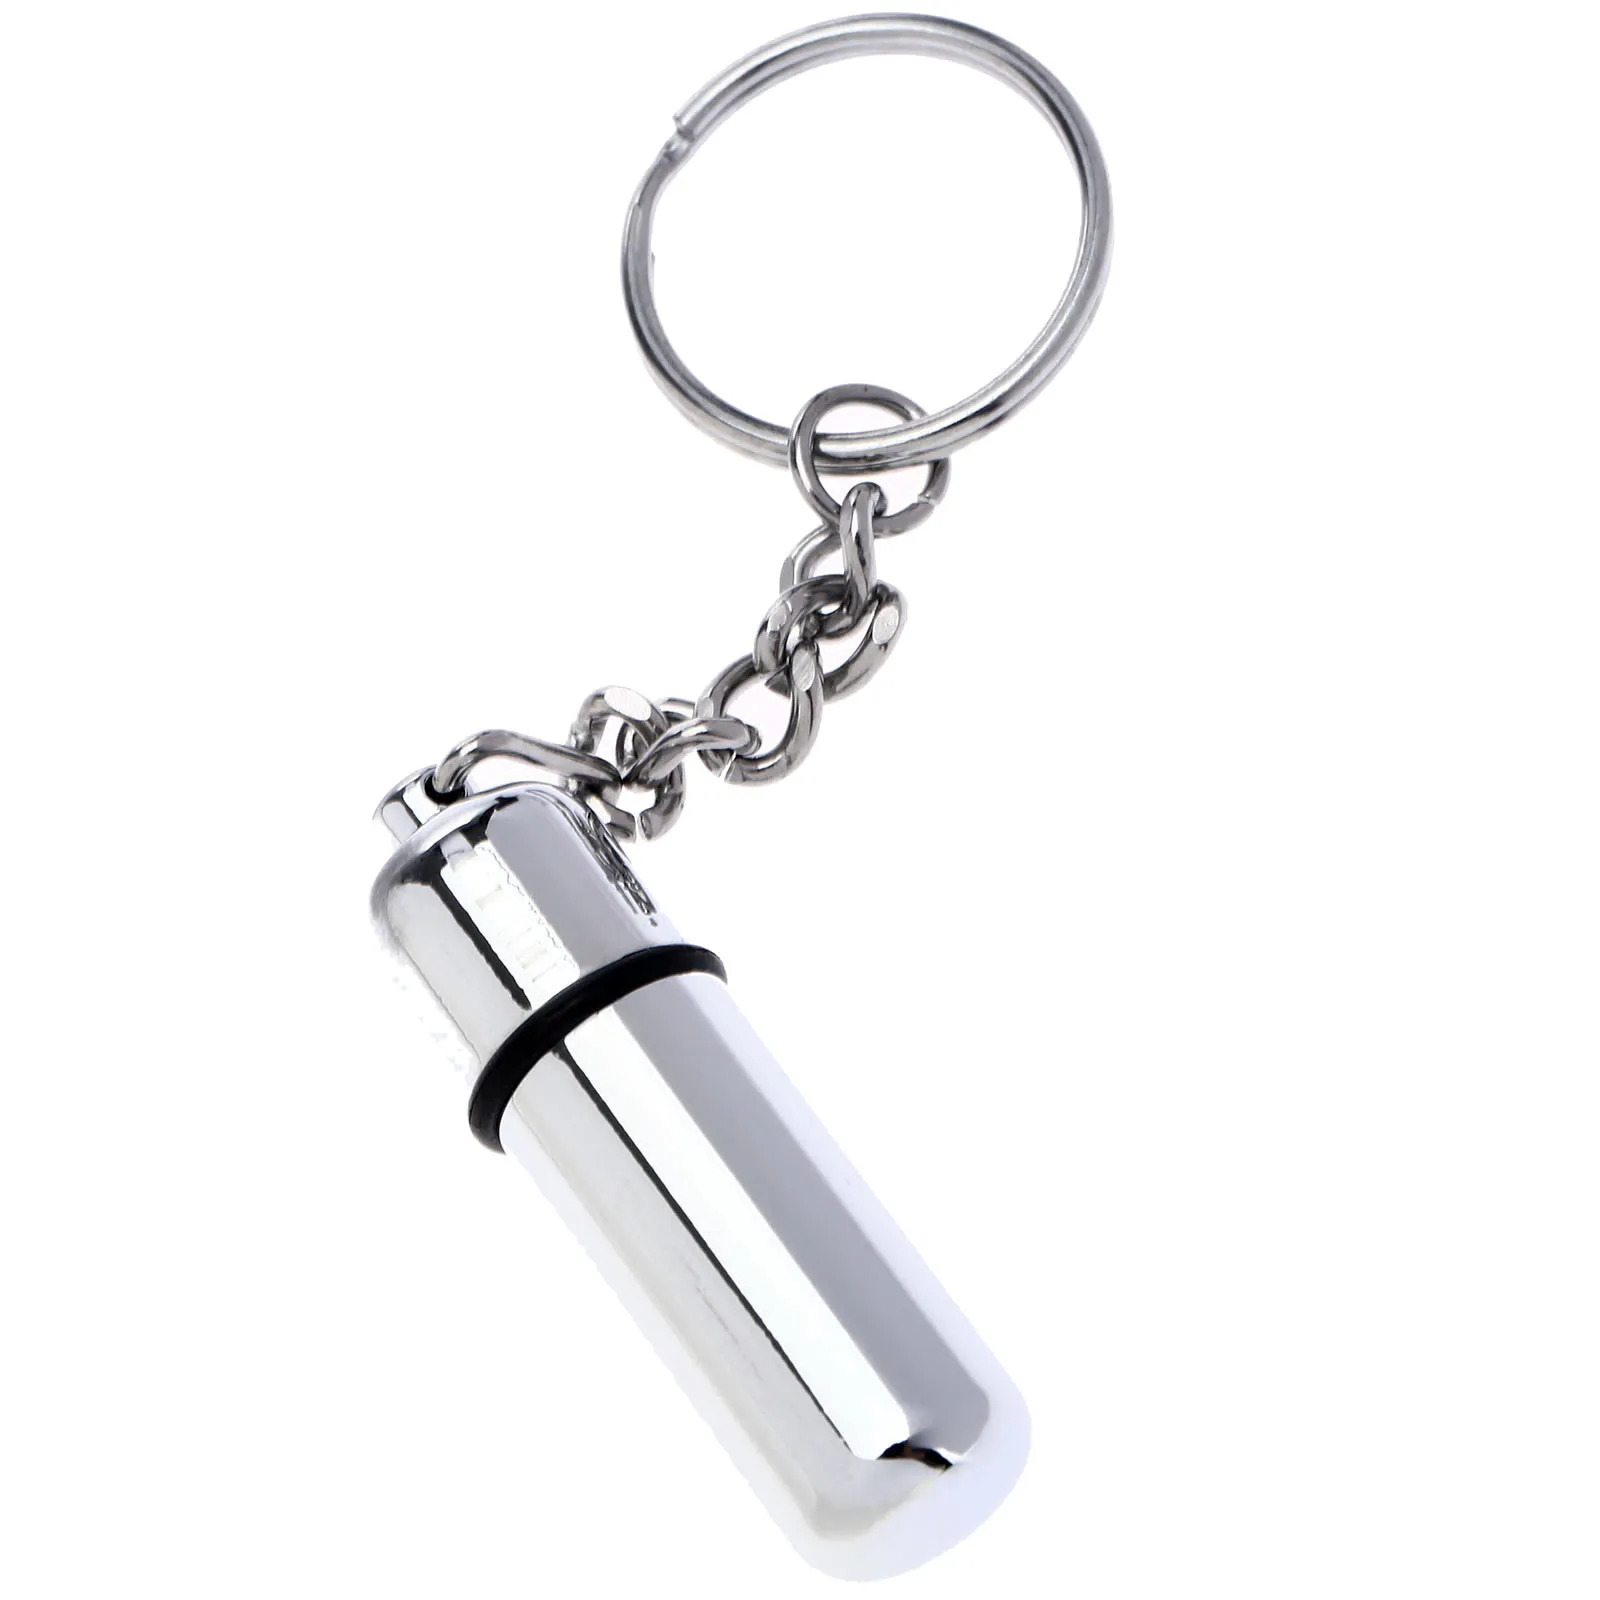 Mini Portable Stainless Steel Cigar Punch Cutter with Key Chain/Ring NEW 